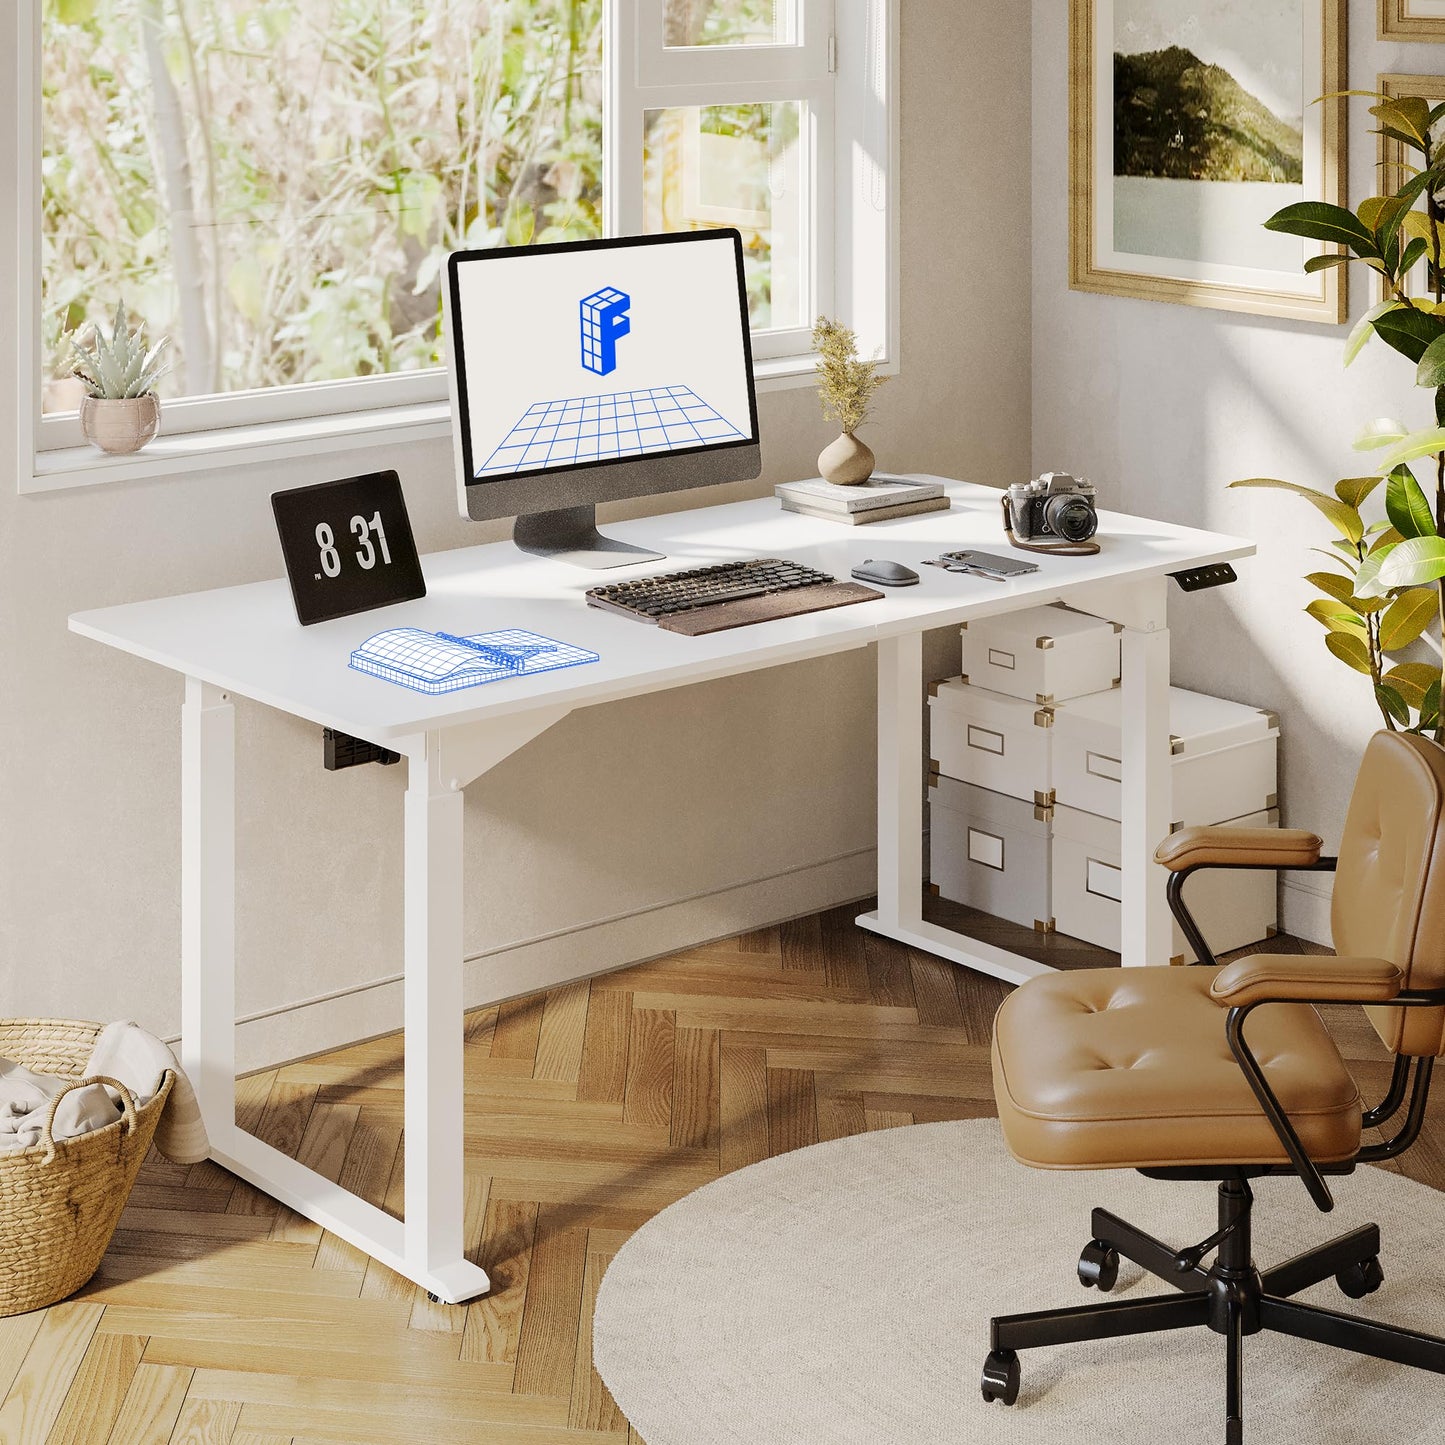 FLEXISPOT Dual Motors 4 Legs Standing Desk 63x30 Inch Adjustable Height Desk with Splice Board Home Office Computer Workstation Electric Sit Stand up